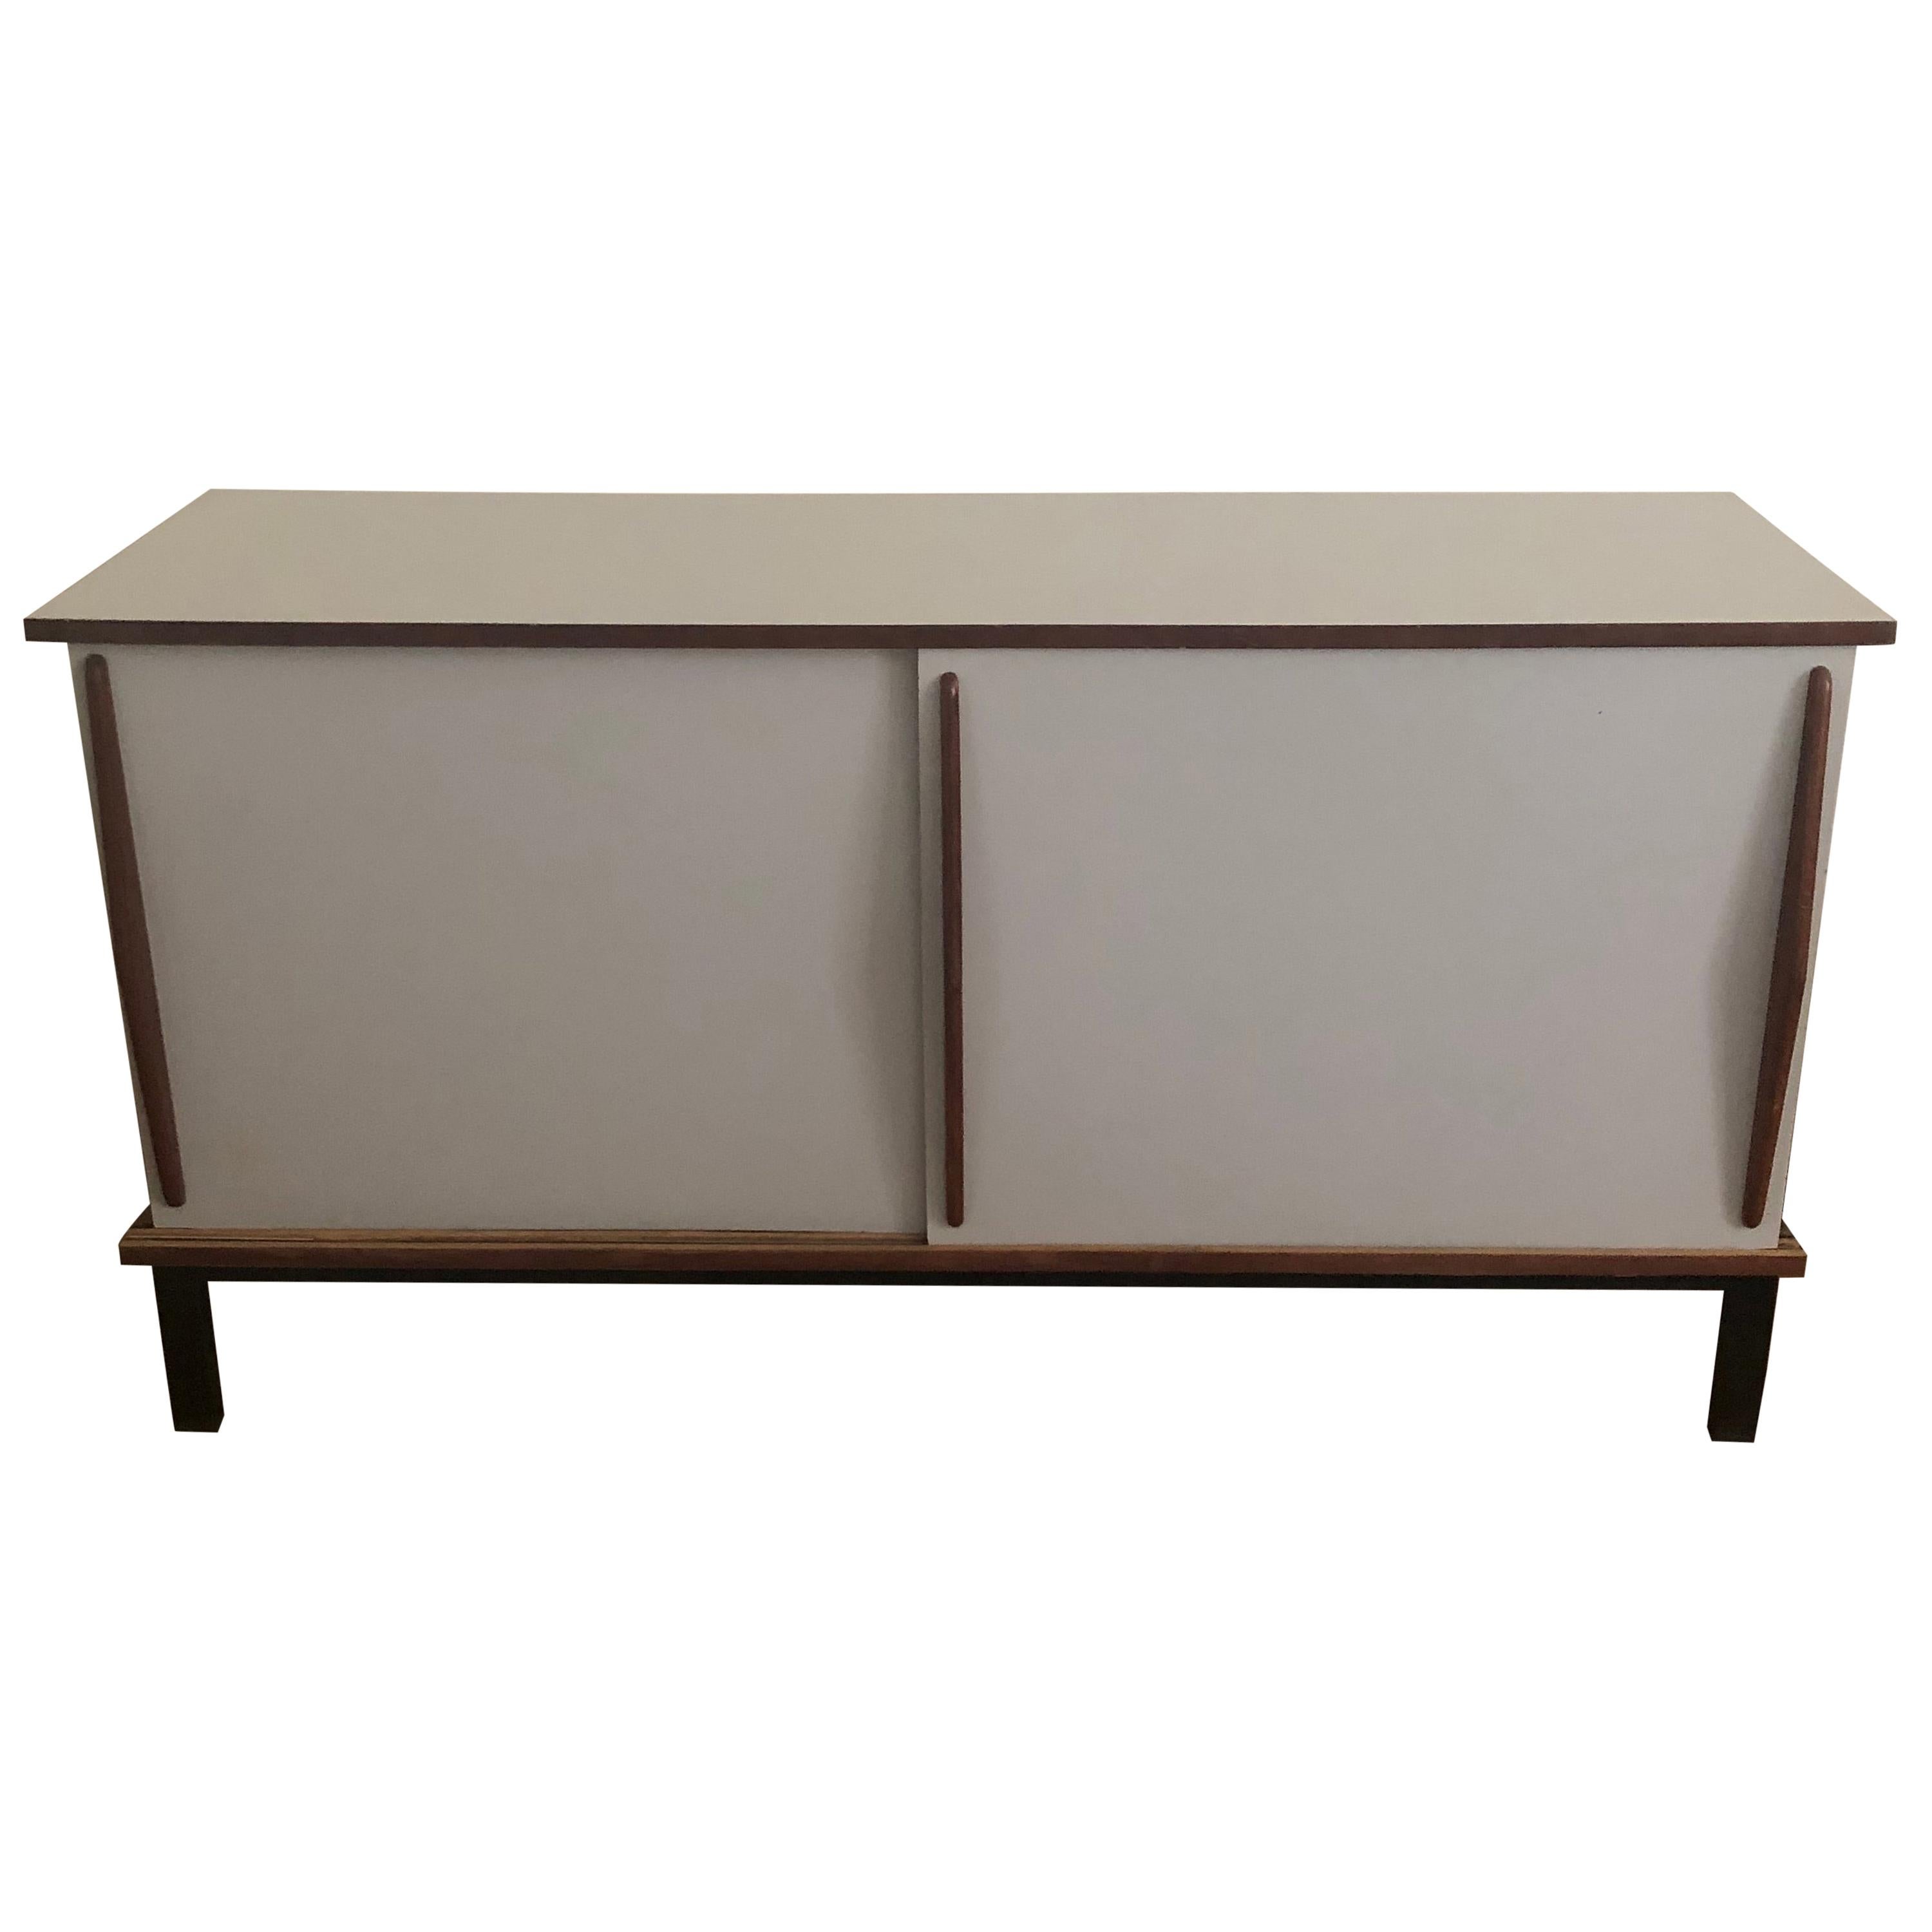 Charlotte Perriand "Cansado" Sideboard For Sale